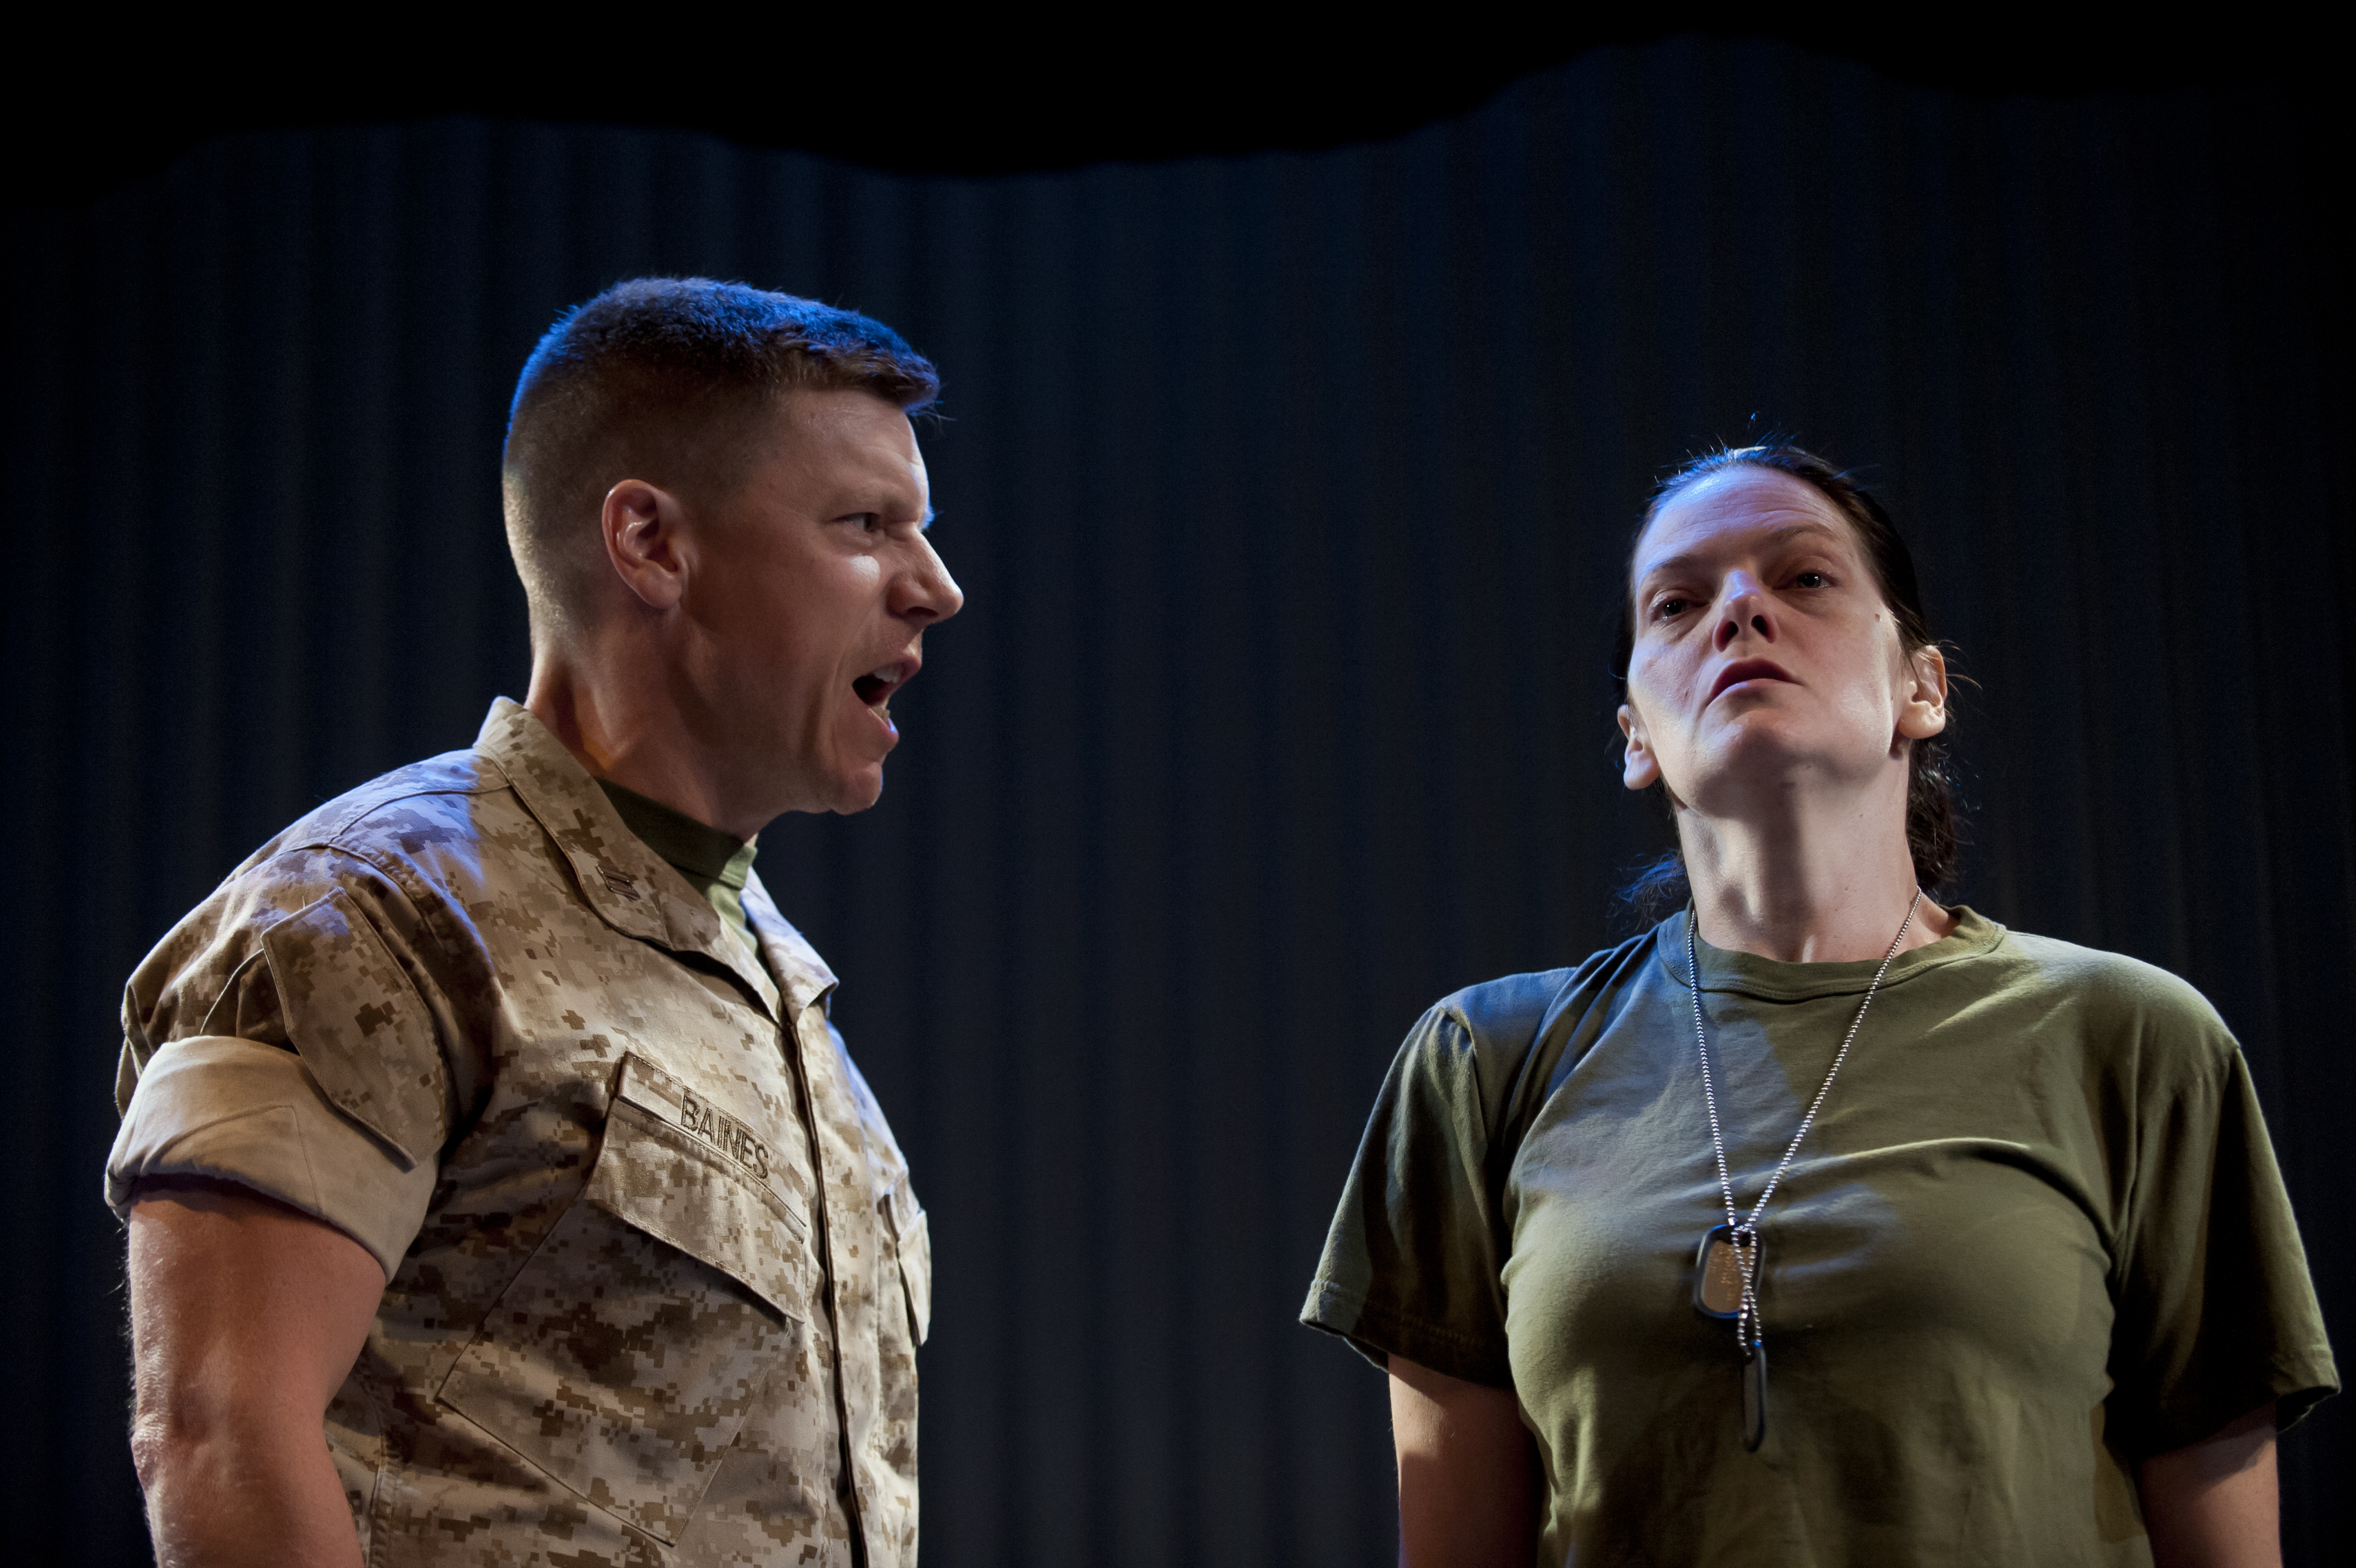 Michael Fuller (Captain Baines) and Marie Elena O'Brien (Sgt. Casey Johnson)in the World Premiere of Tammy Ryan's 'Soldier's Heart'